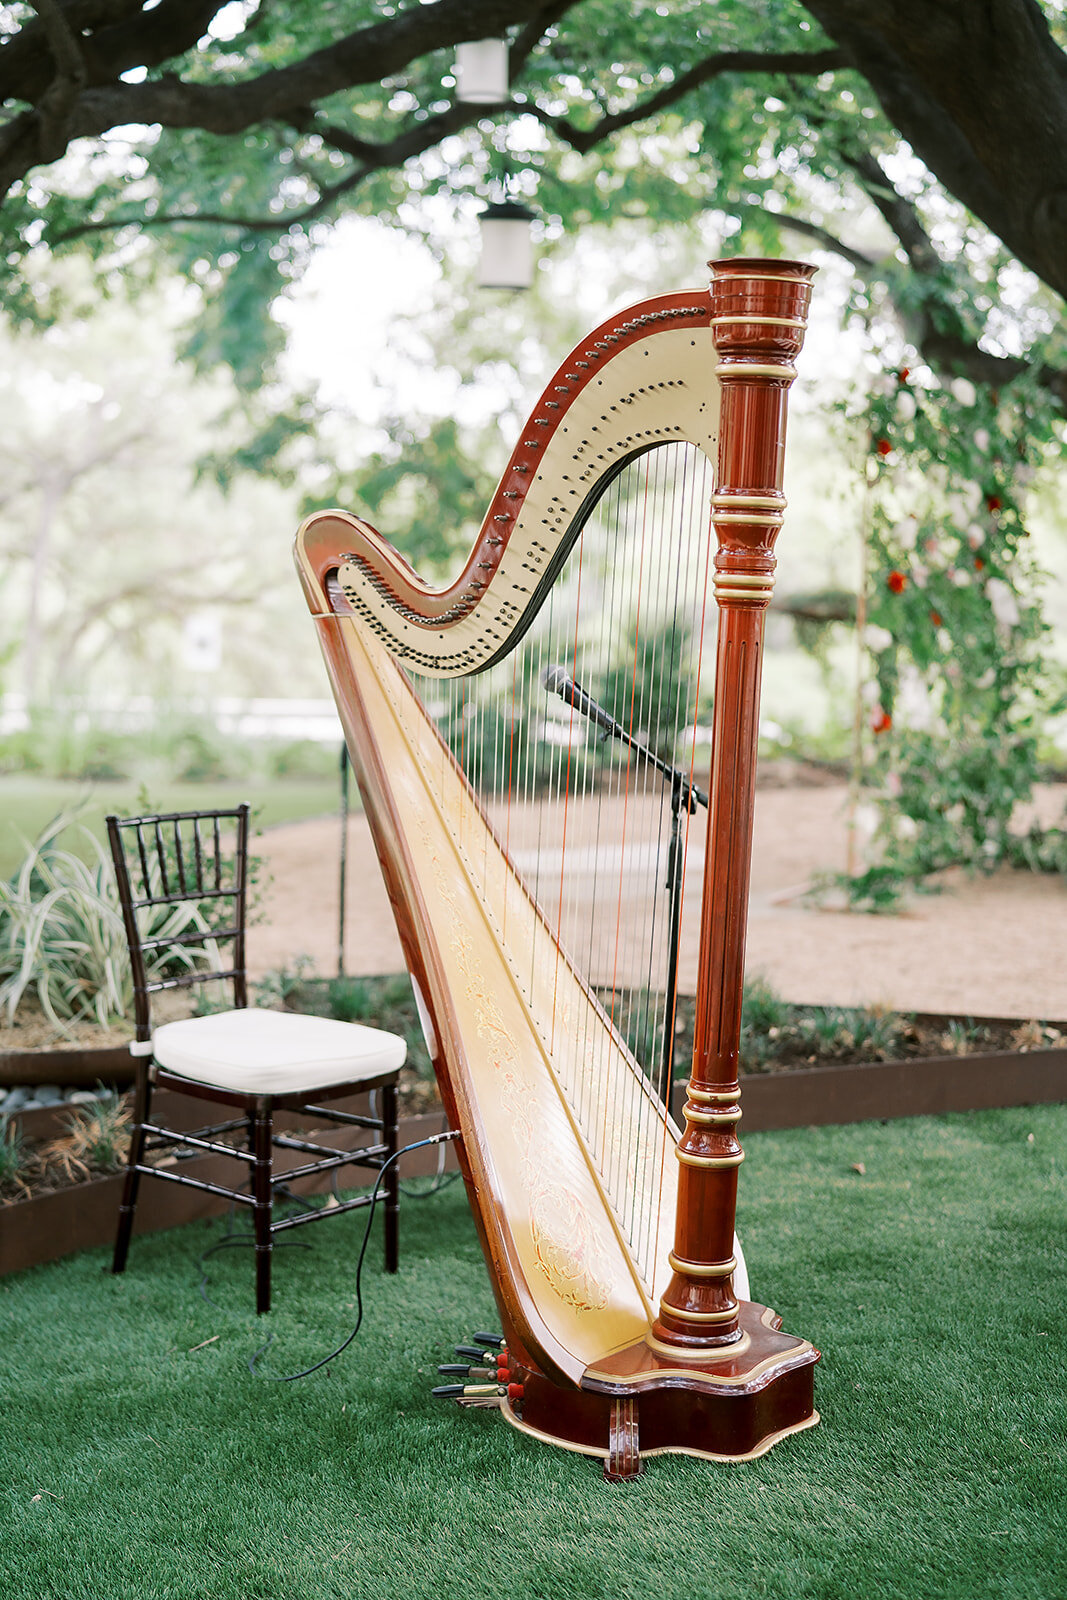 A grand harp sits ready for the ceremony at the Four Seasons in Austitn